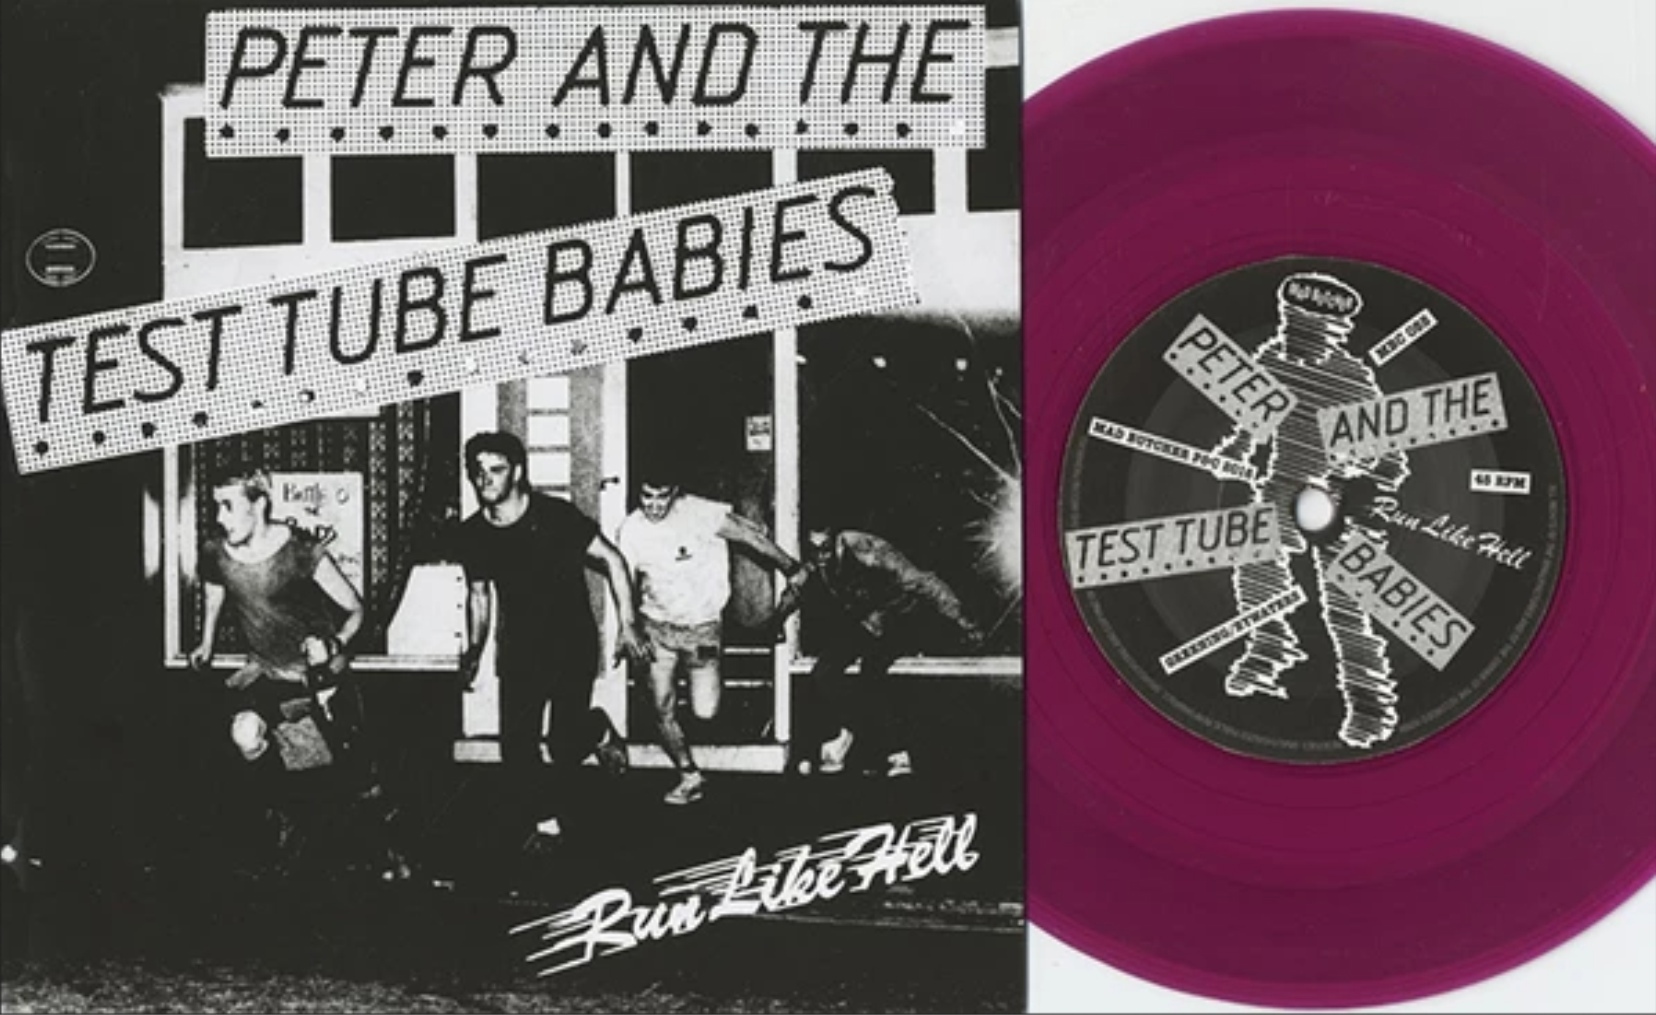 Peter And The Test Tube Babies  Run Like Hell  7" (Purple)